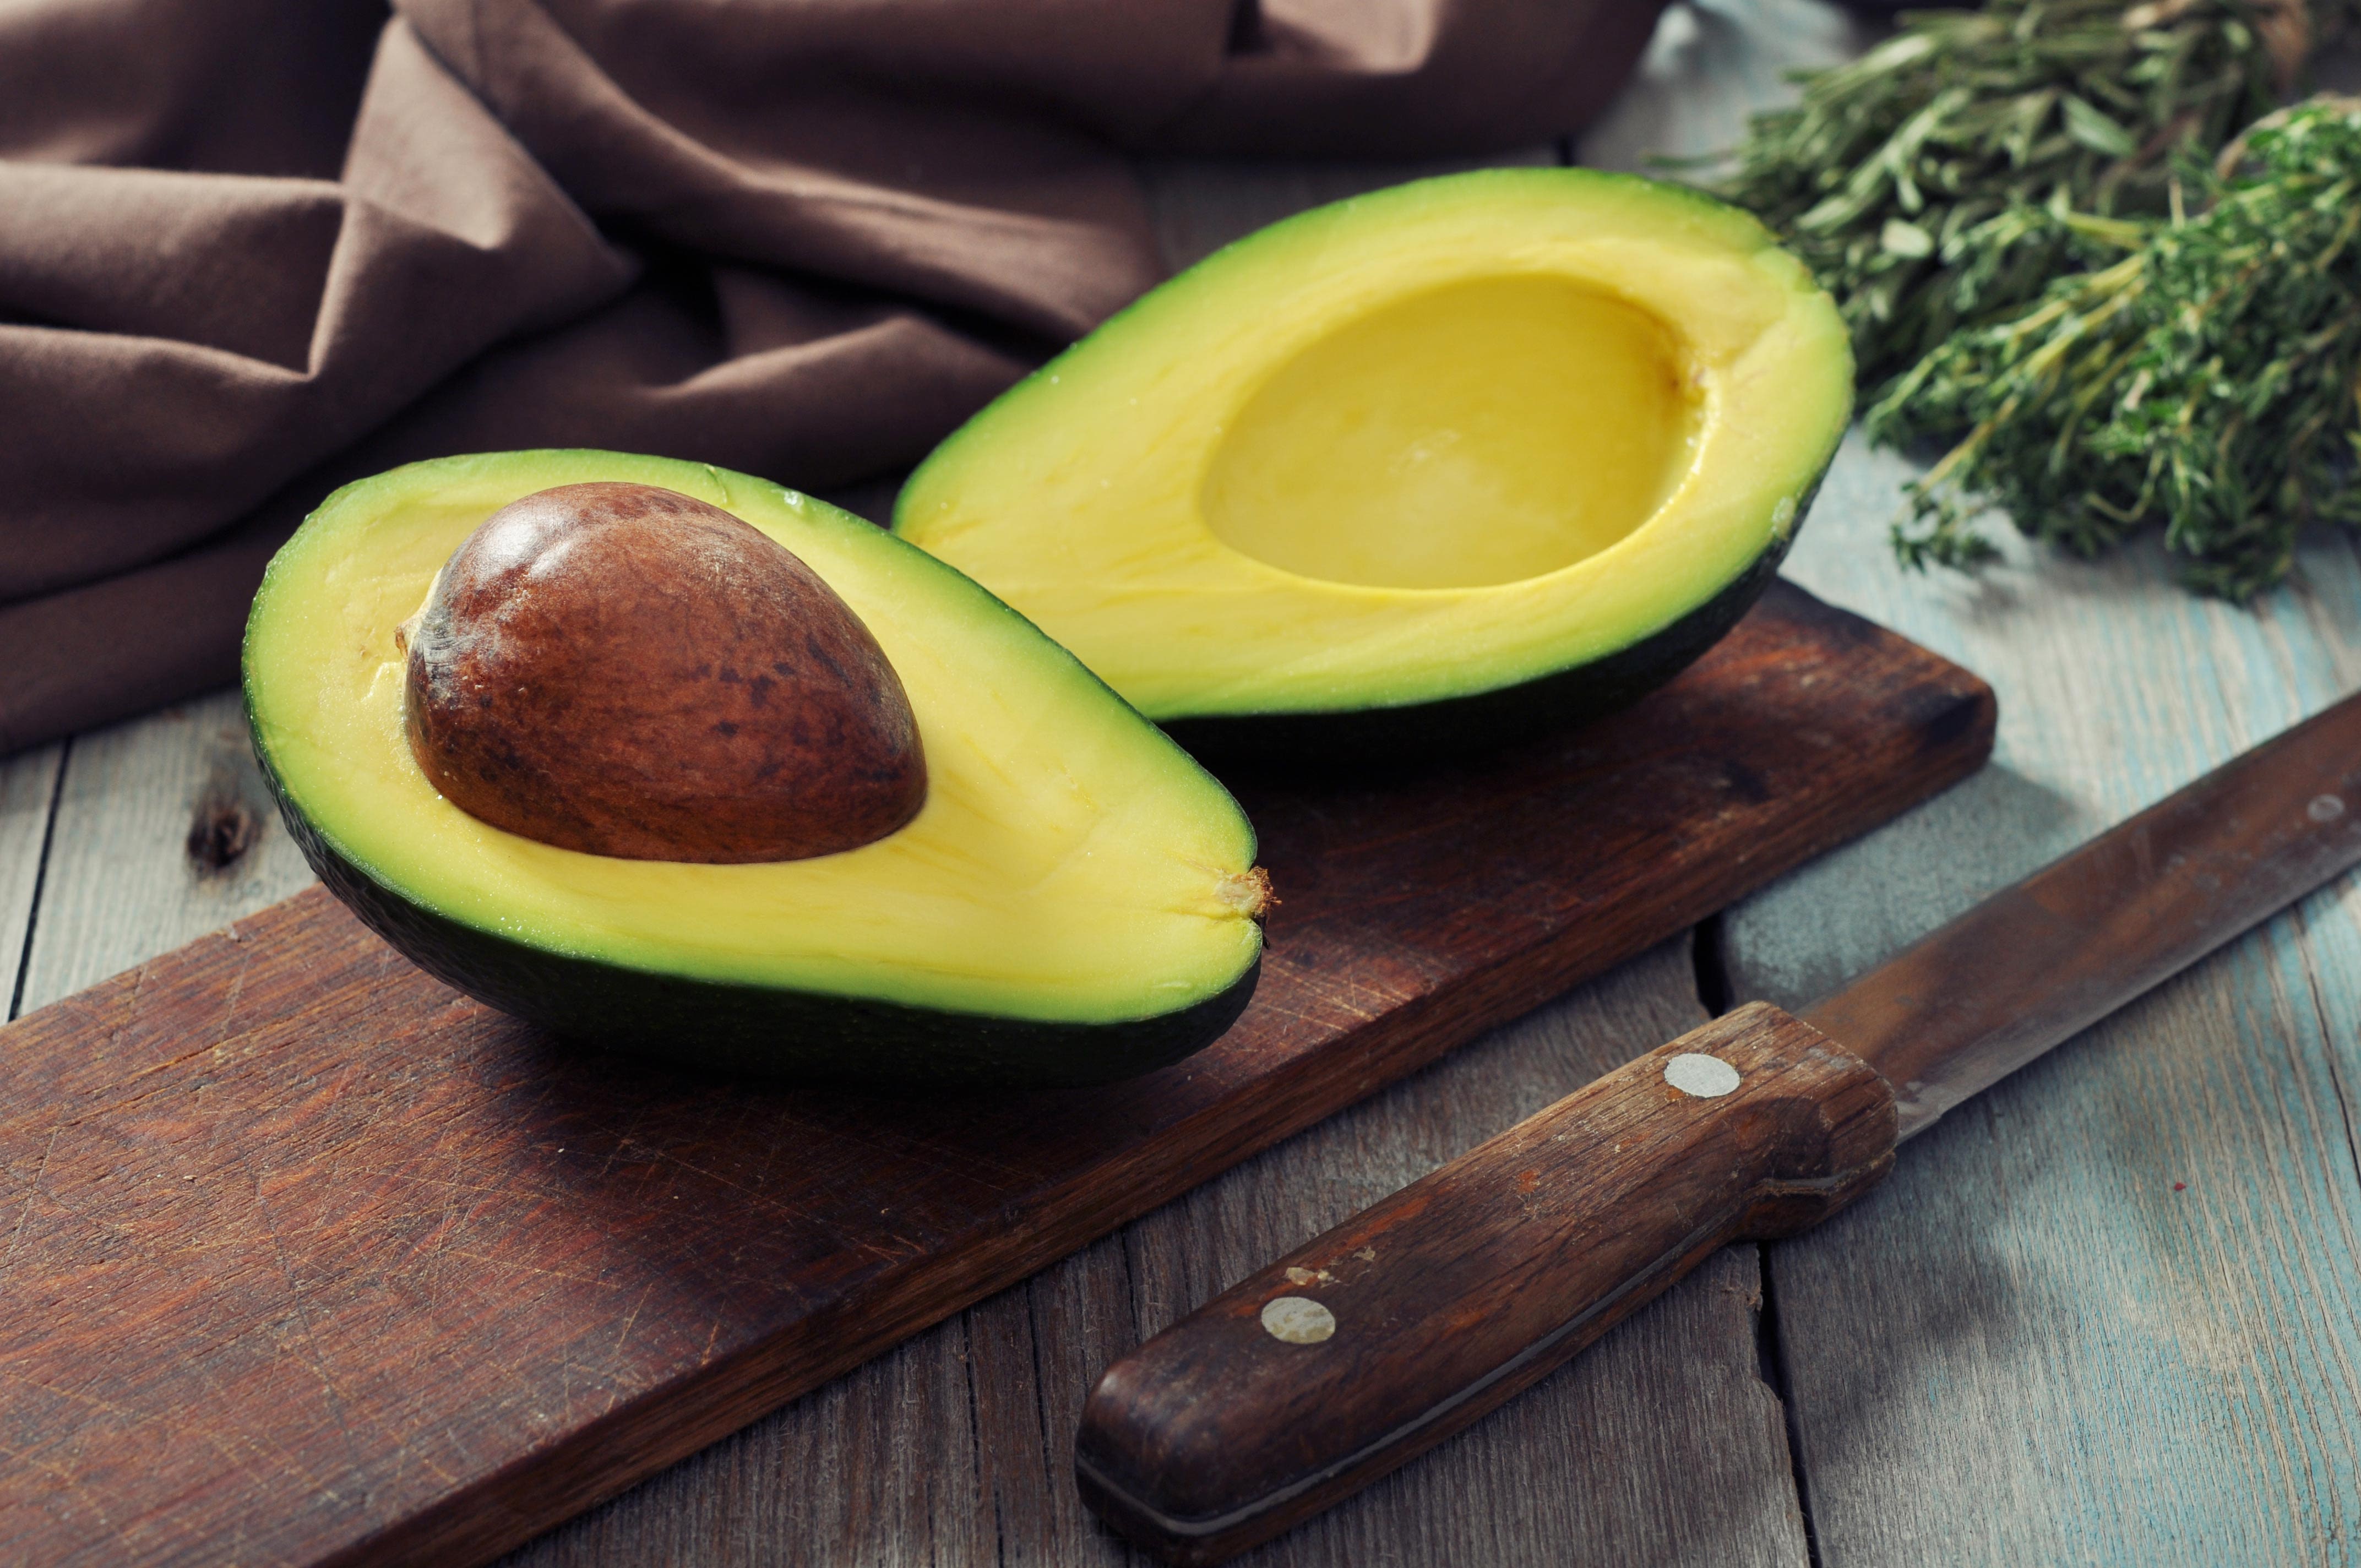 7 Health Benefits Of Avocados & How To Eat Them